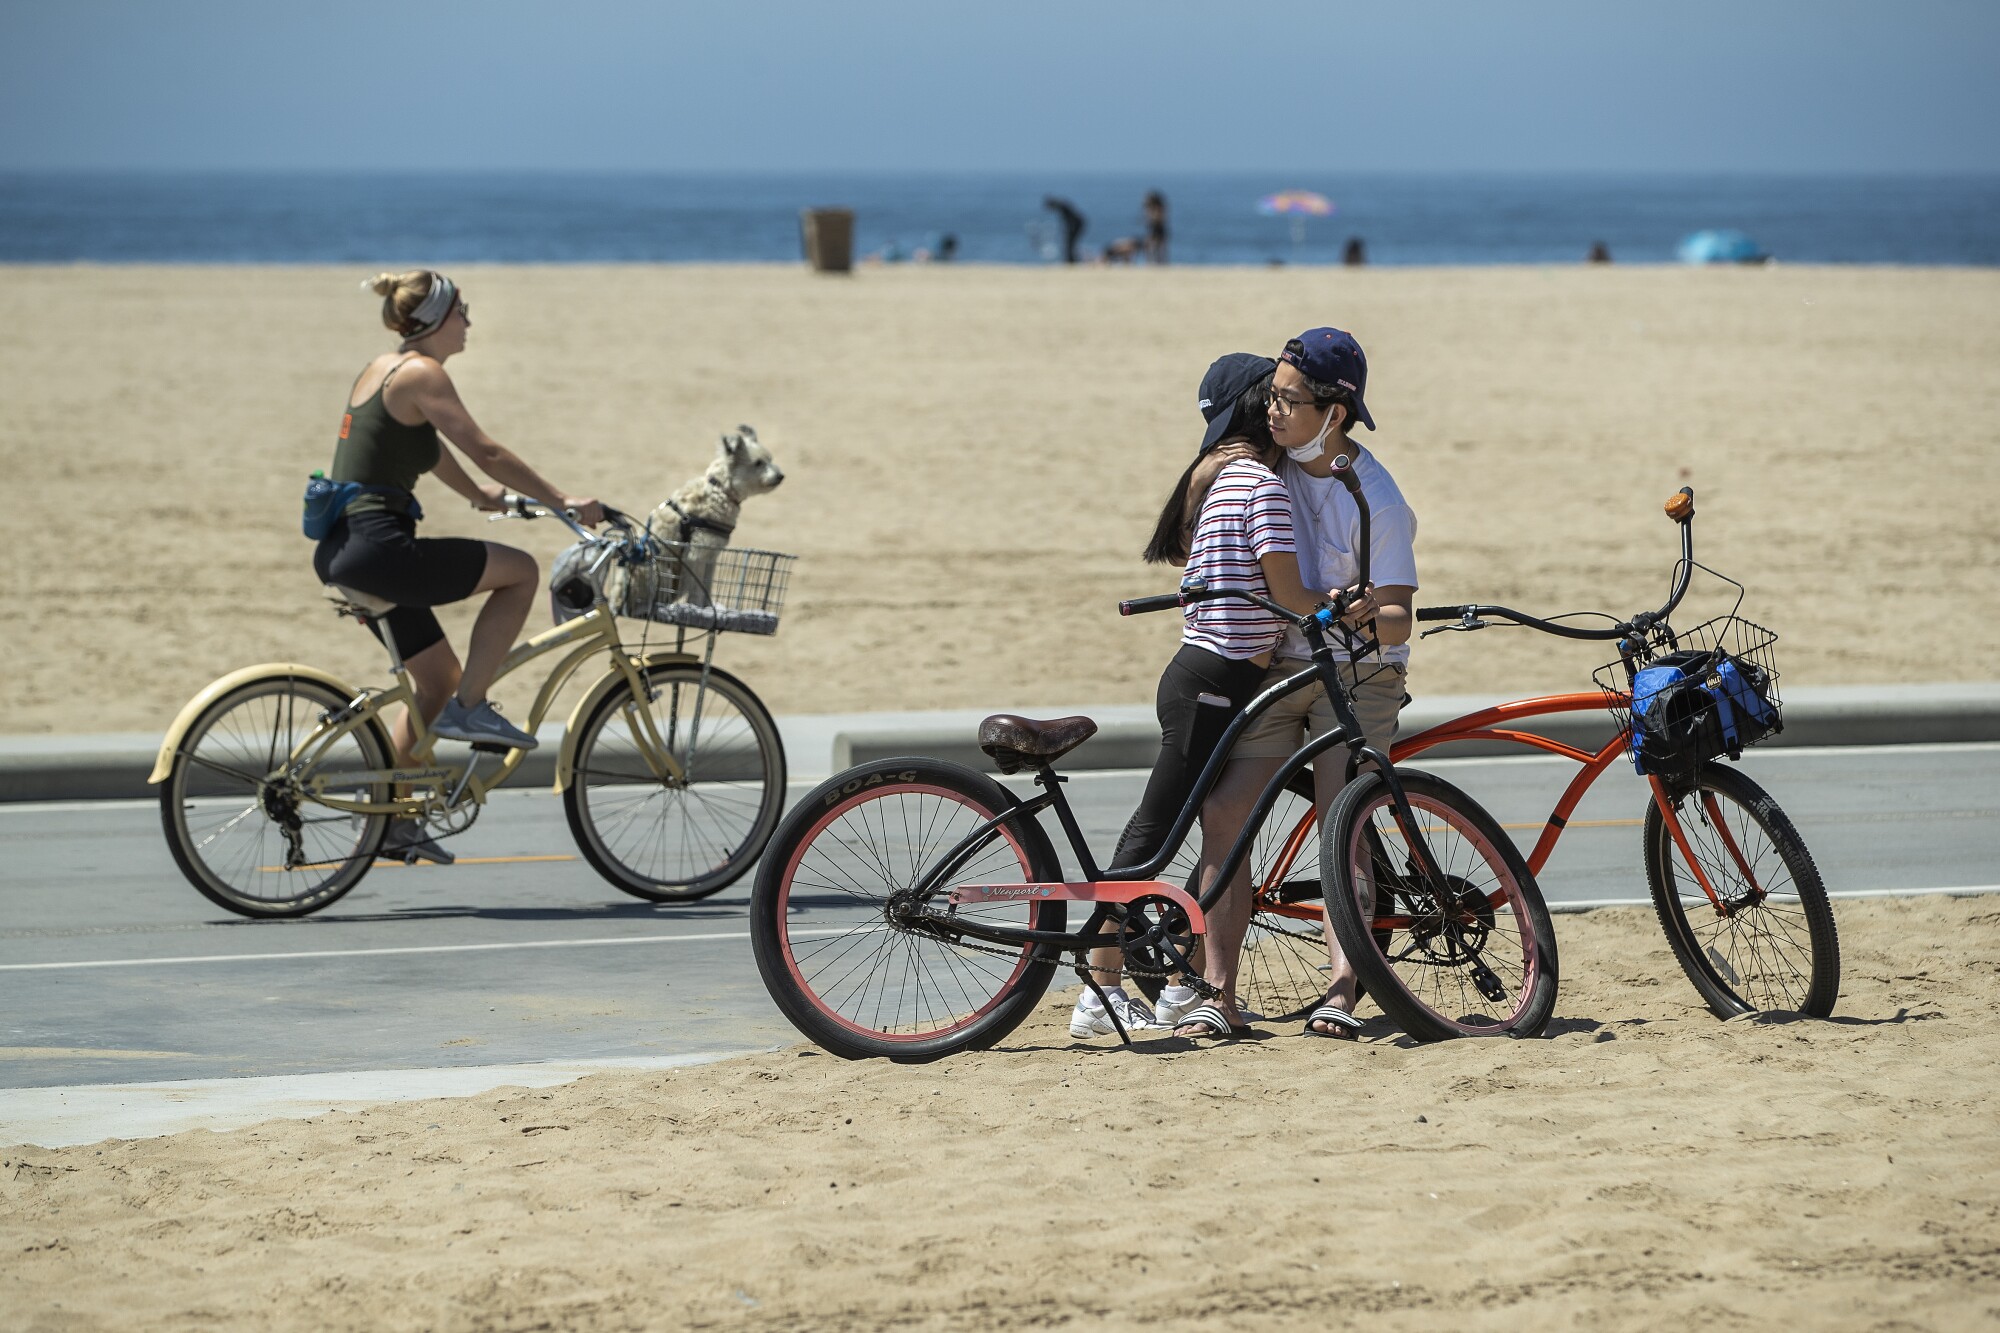 People on bikes at the beach